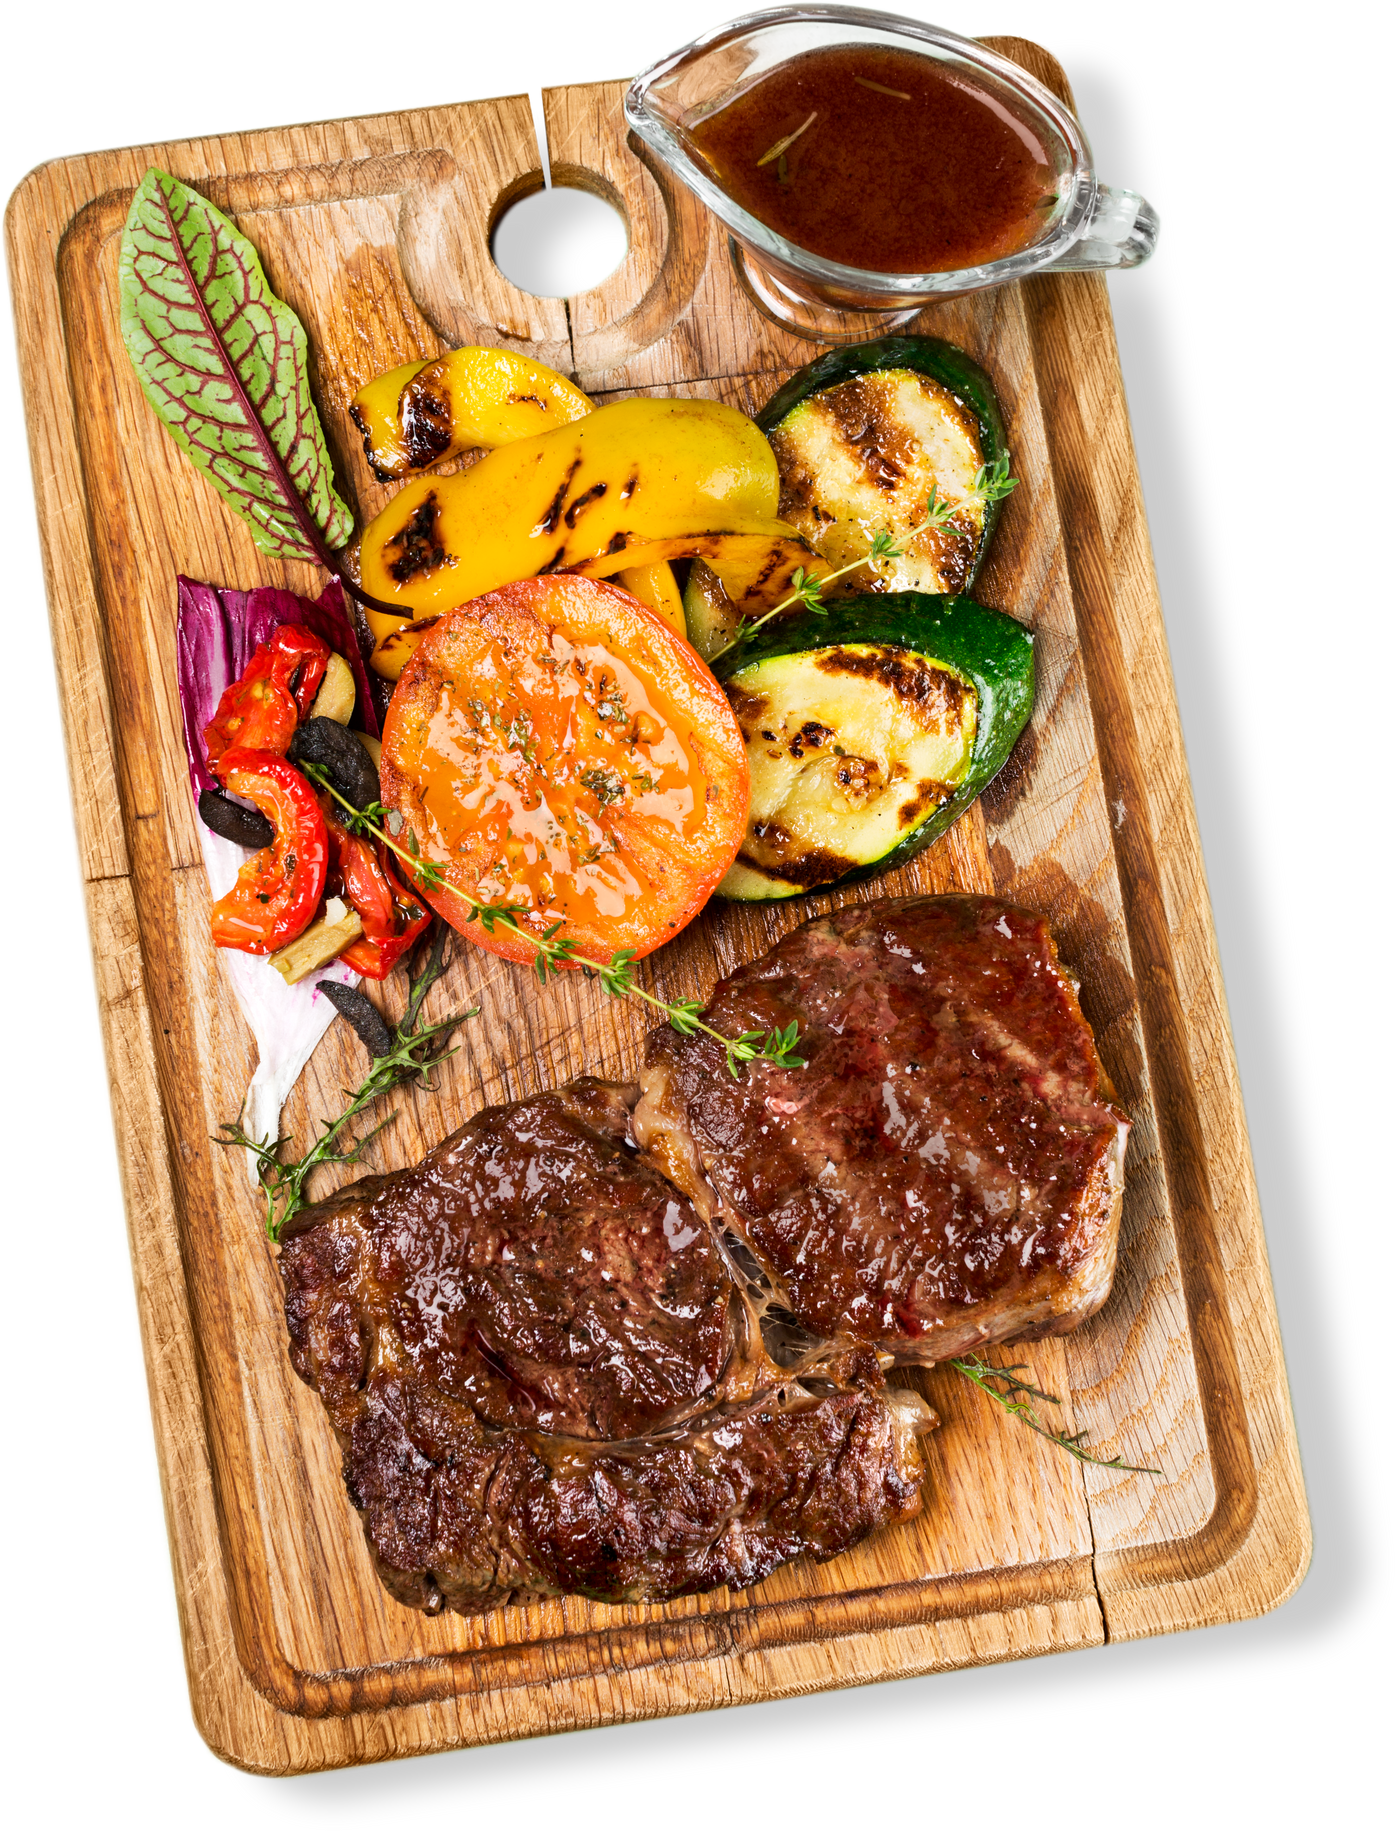 Grilled Steak on a Wooden Plate